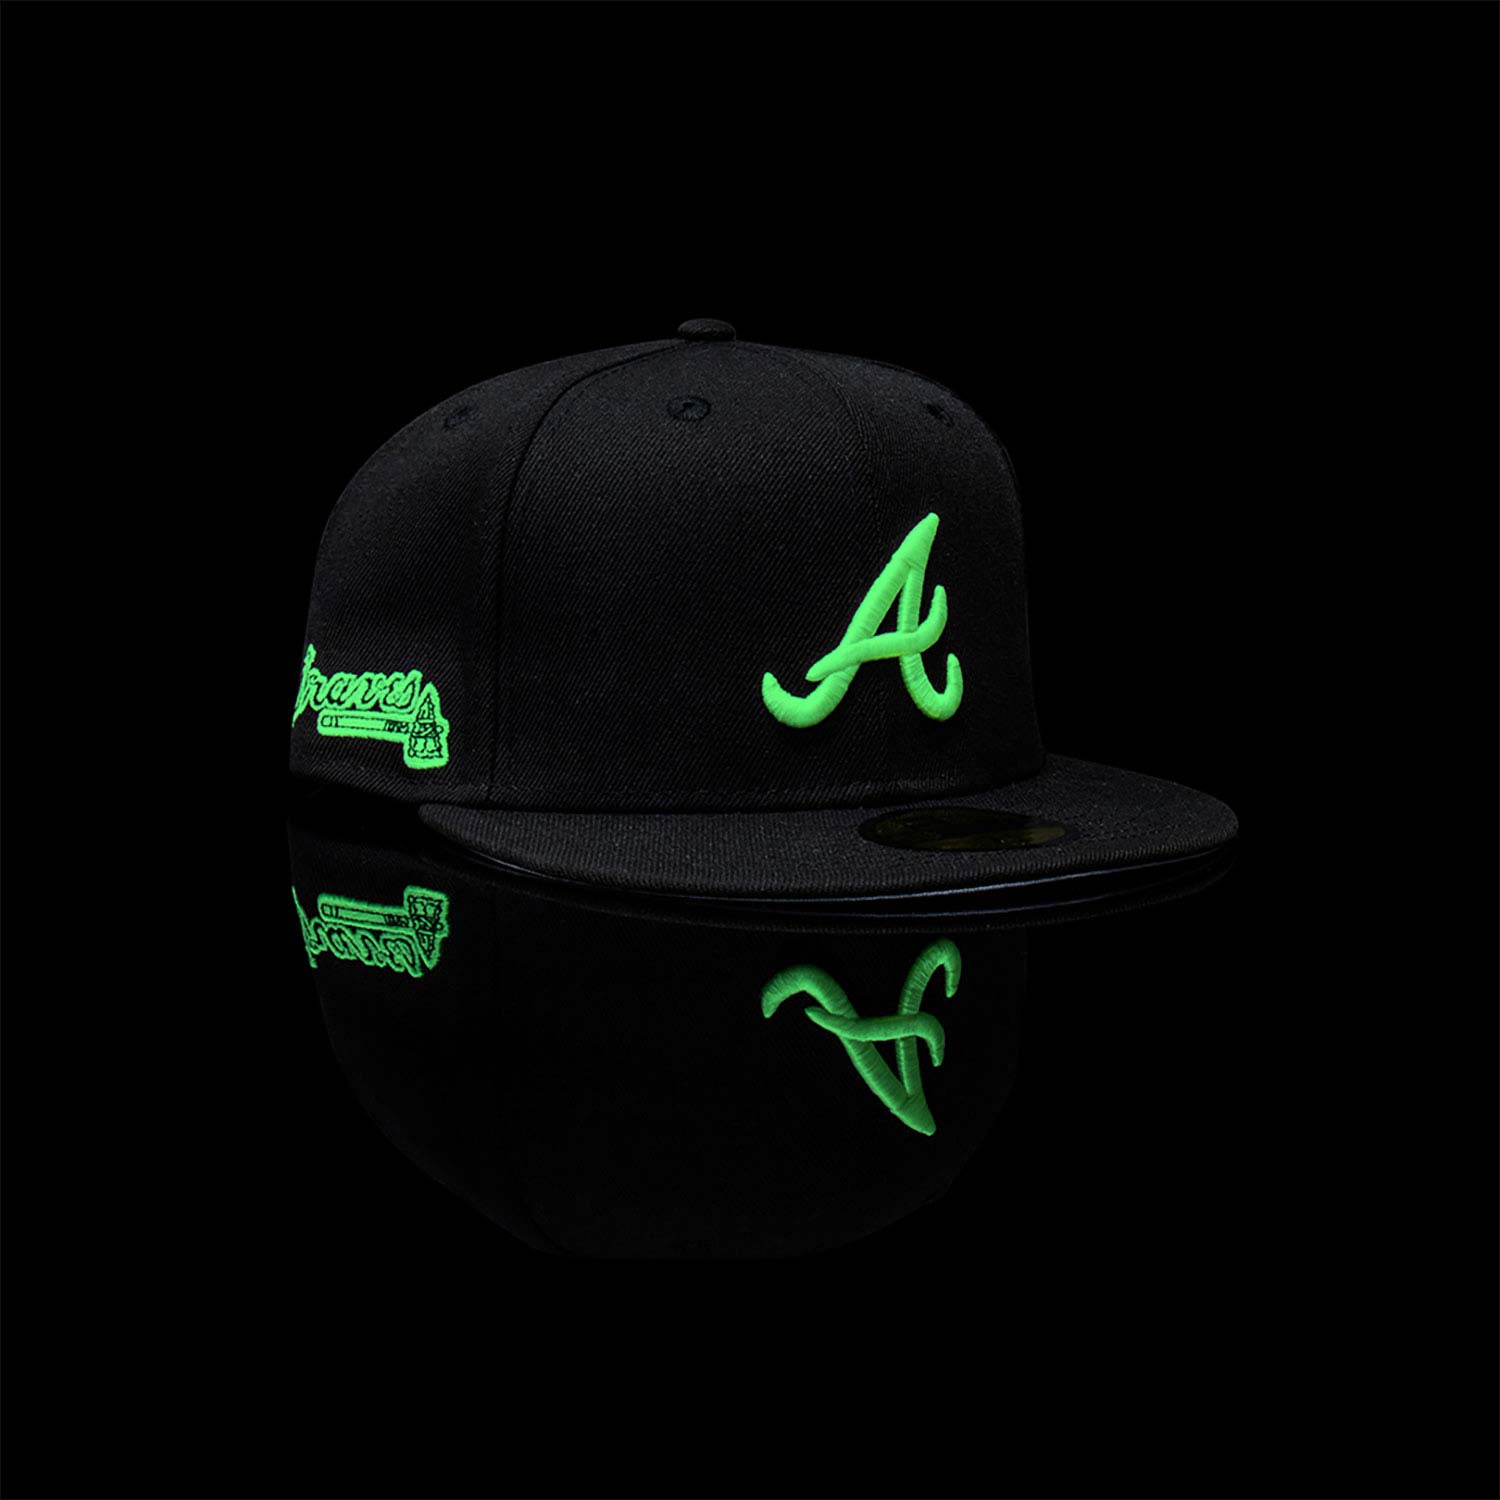 Official New Era Atlanta Braves MLB Black 59FIFTY Fitted Cap